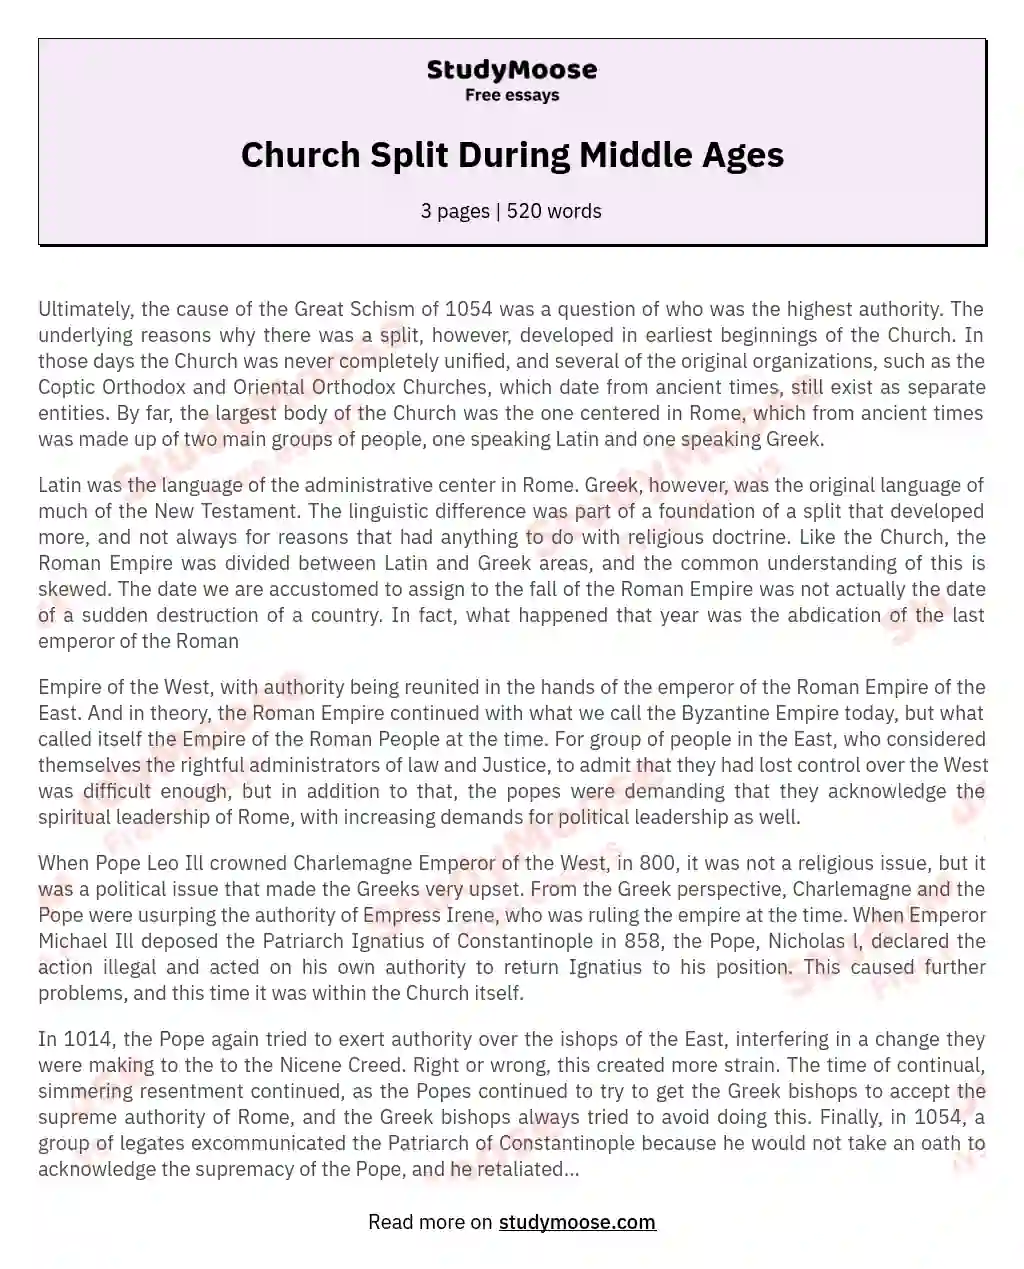 Church Split During Middle Ages essay